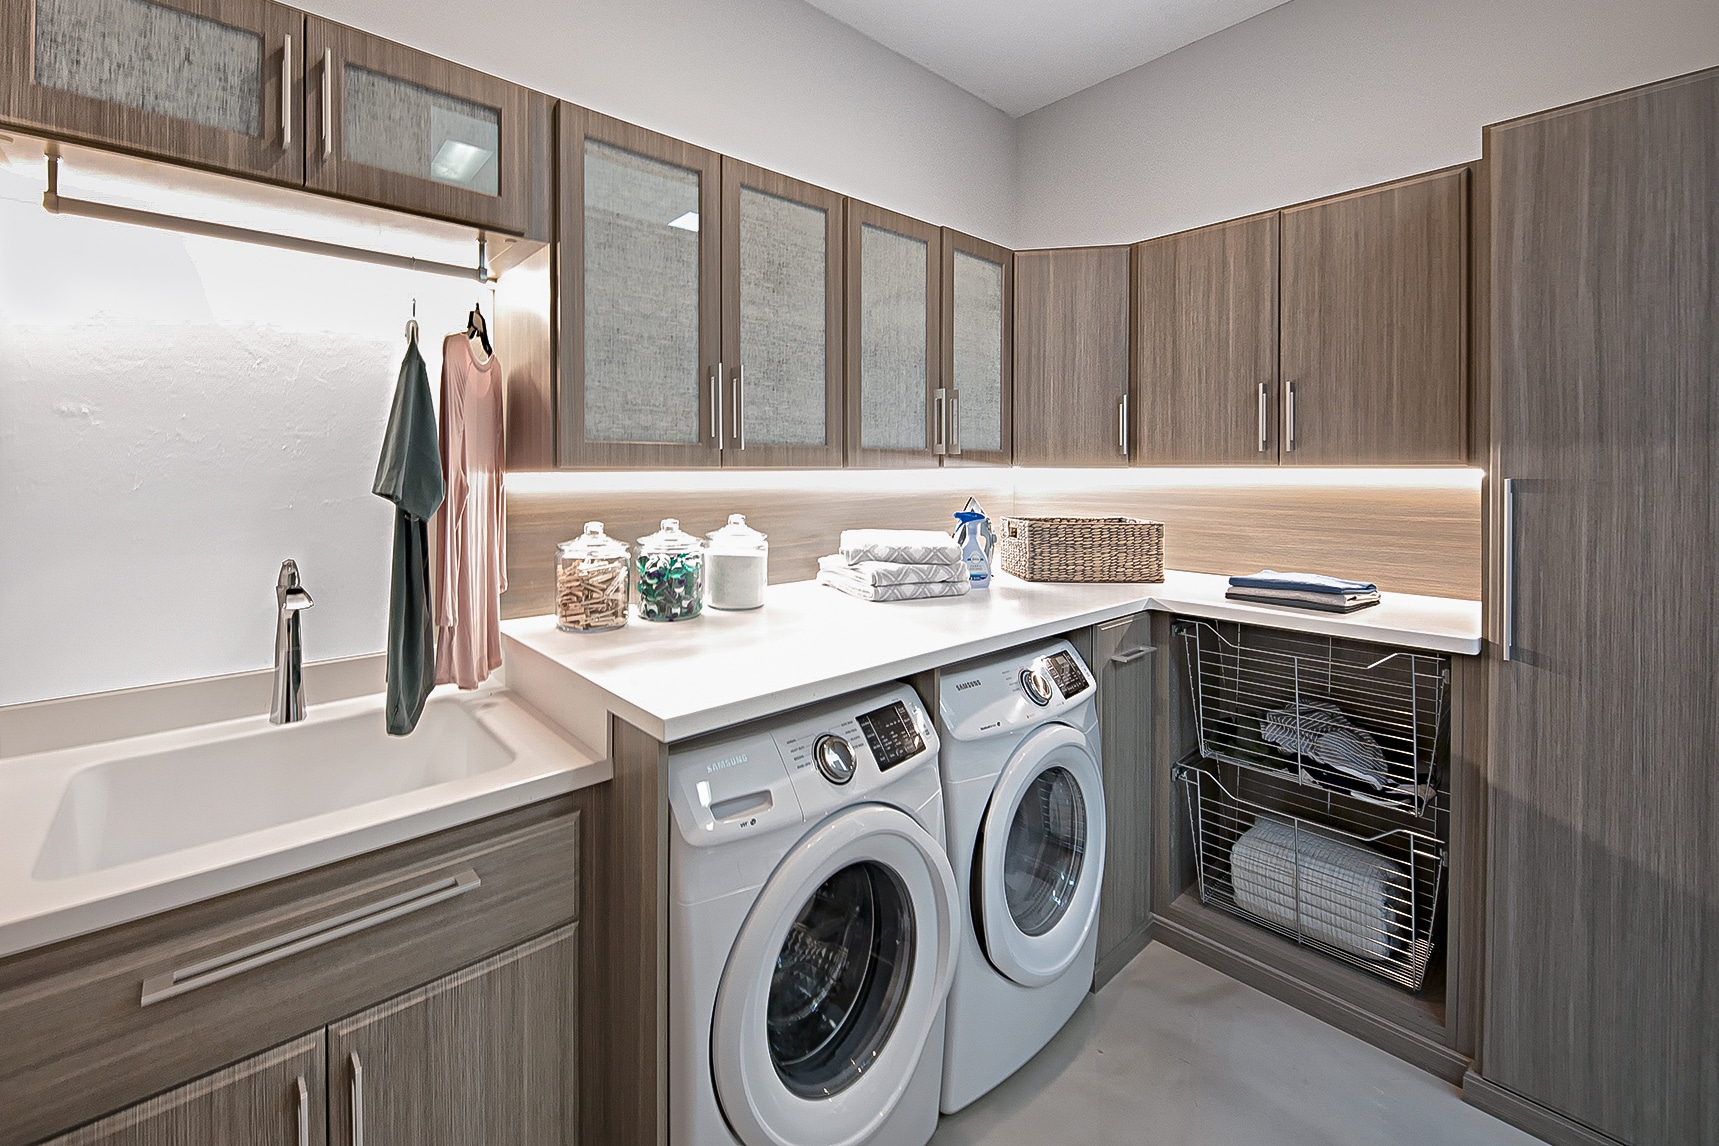 Custom Laundry Cabinet Ideas: Maximising Space and Functionality in ...